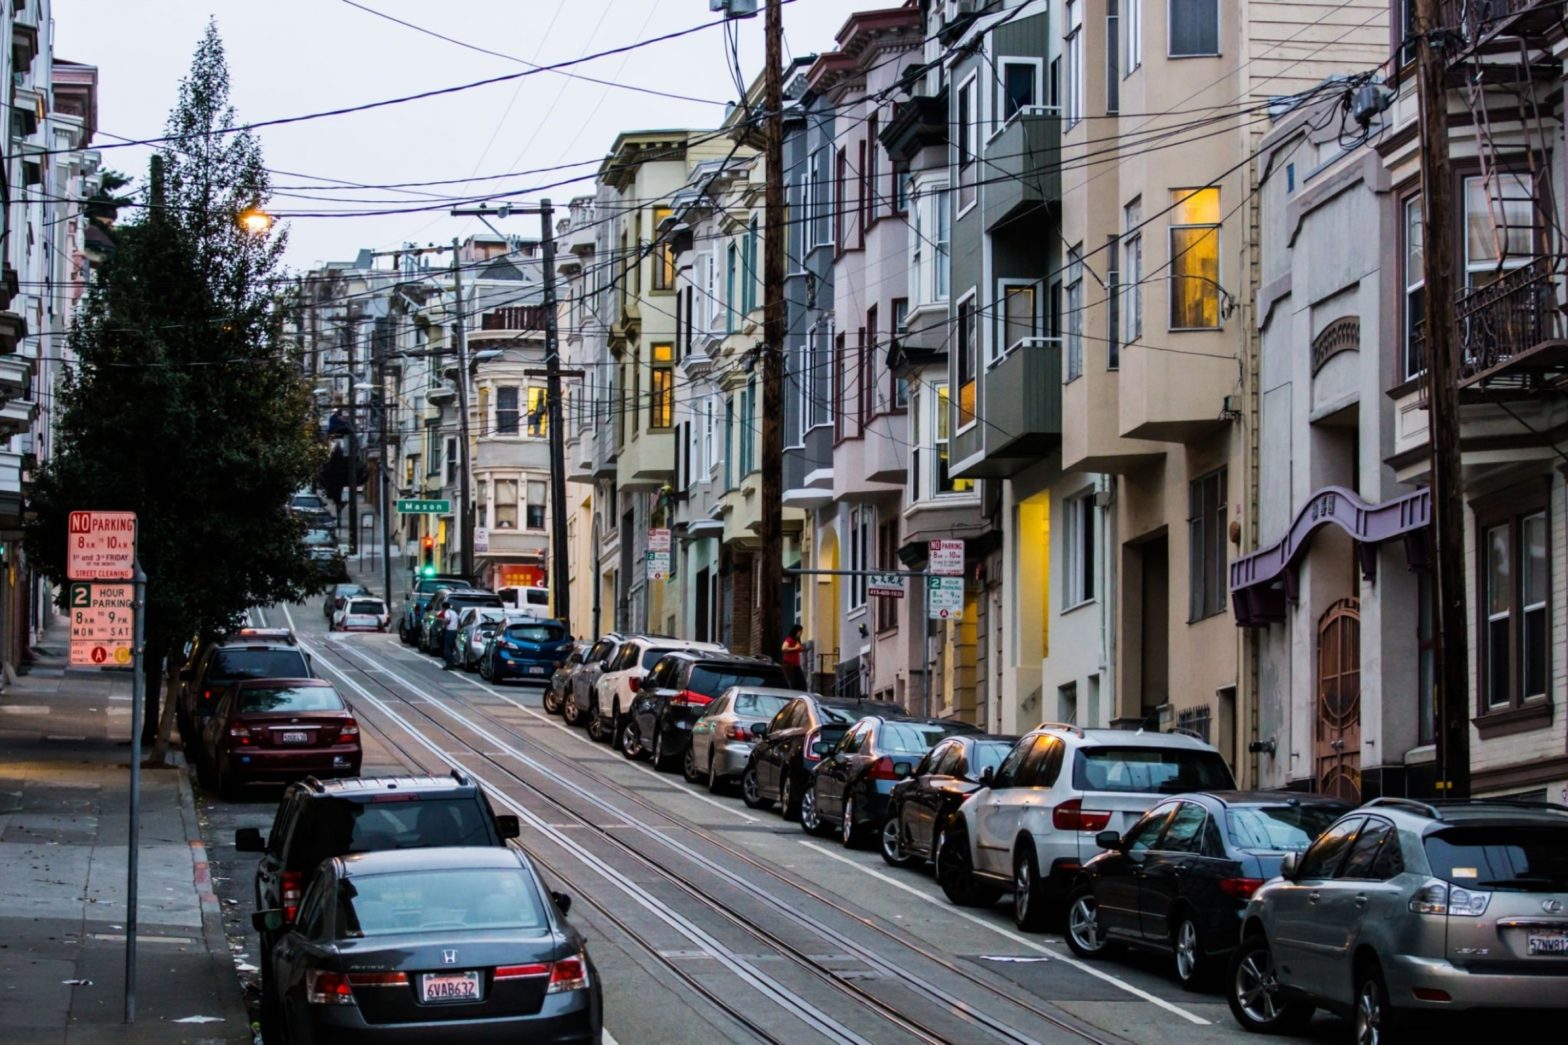 Space Oddity: How Are There a Quarter Billion Dollars’ Worth of Available Parking Spaces in San Francisco?